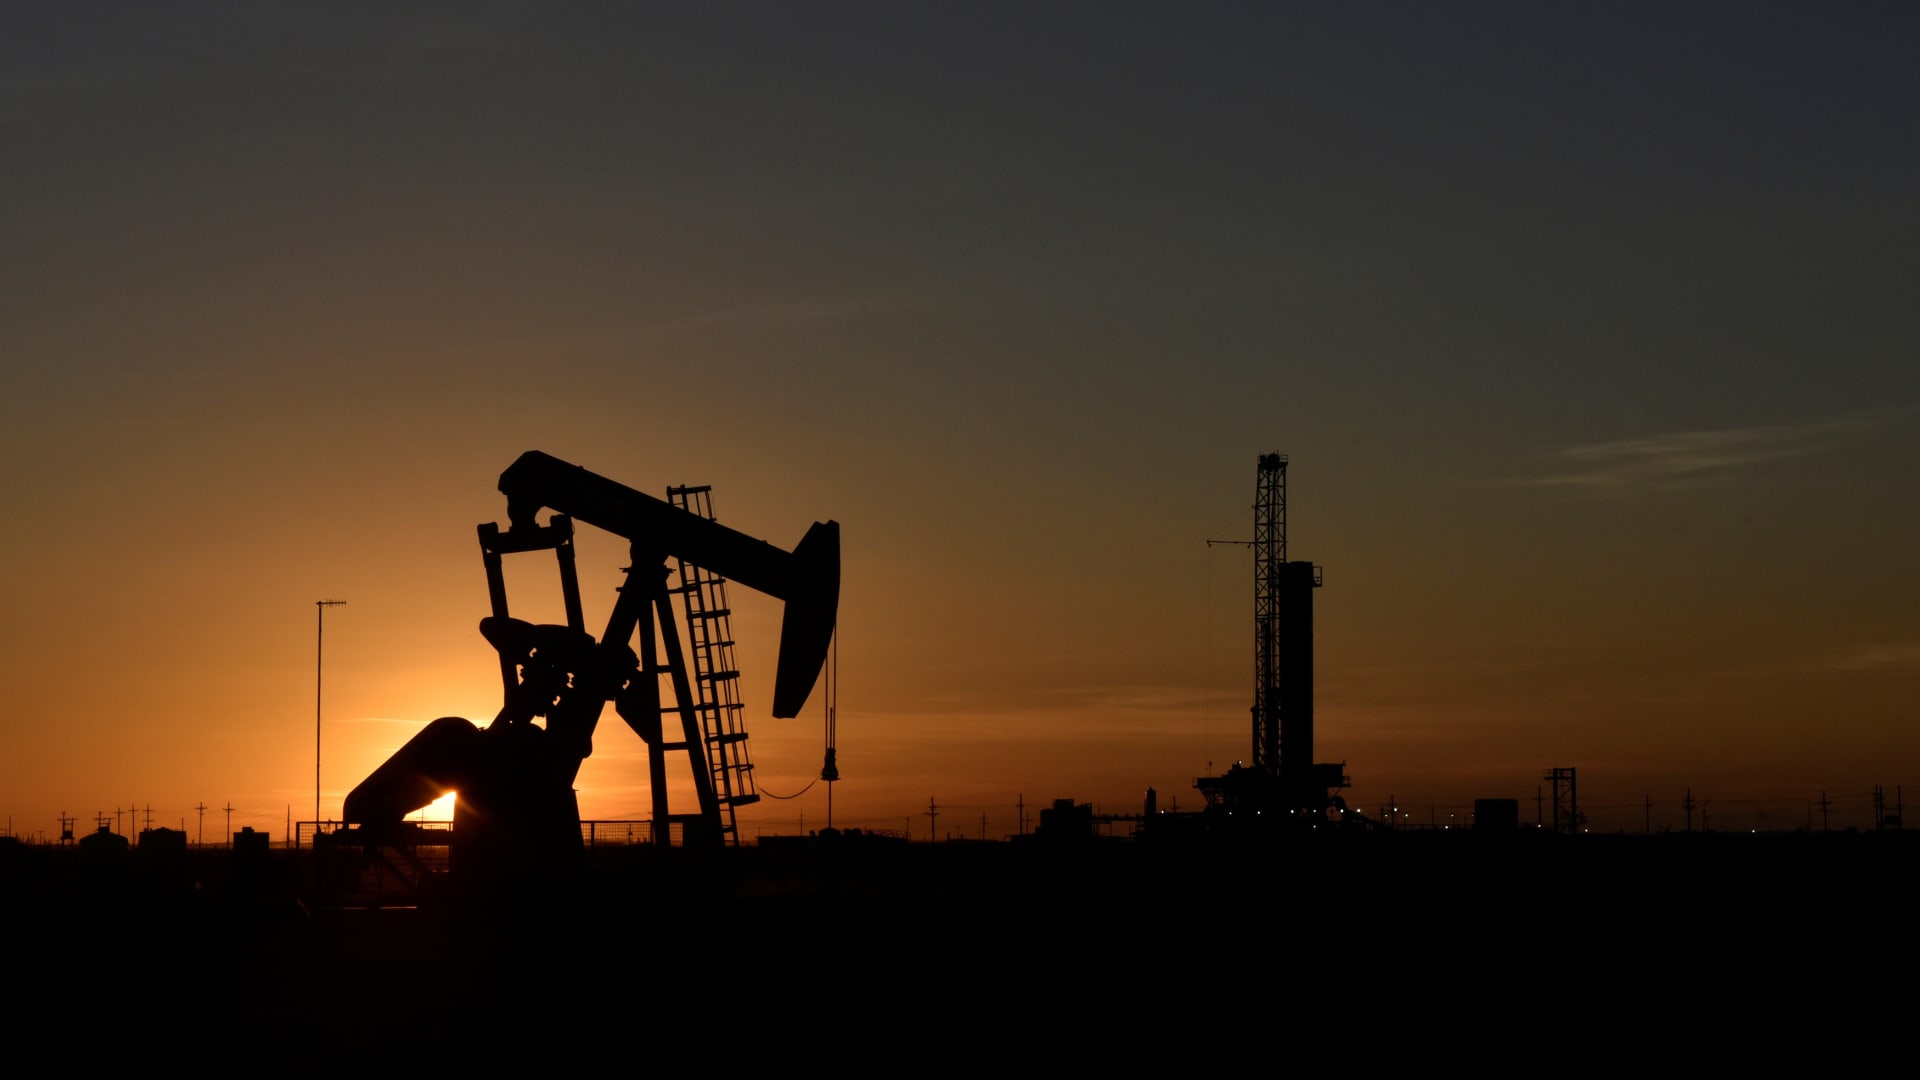 A pump jack operates in front of a drilling rig at sunset in an oil field in Midland, Texas, on Aug. 22, 2018.